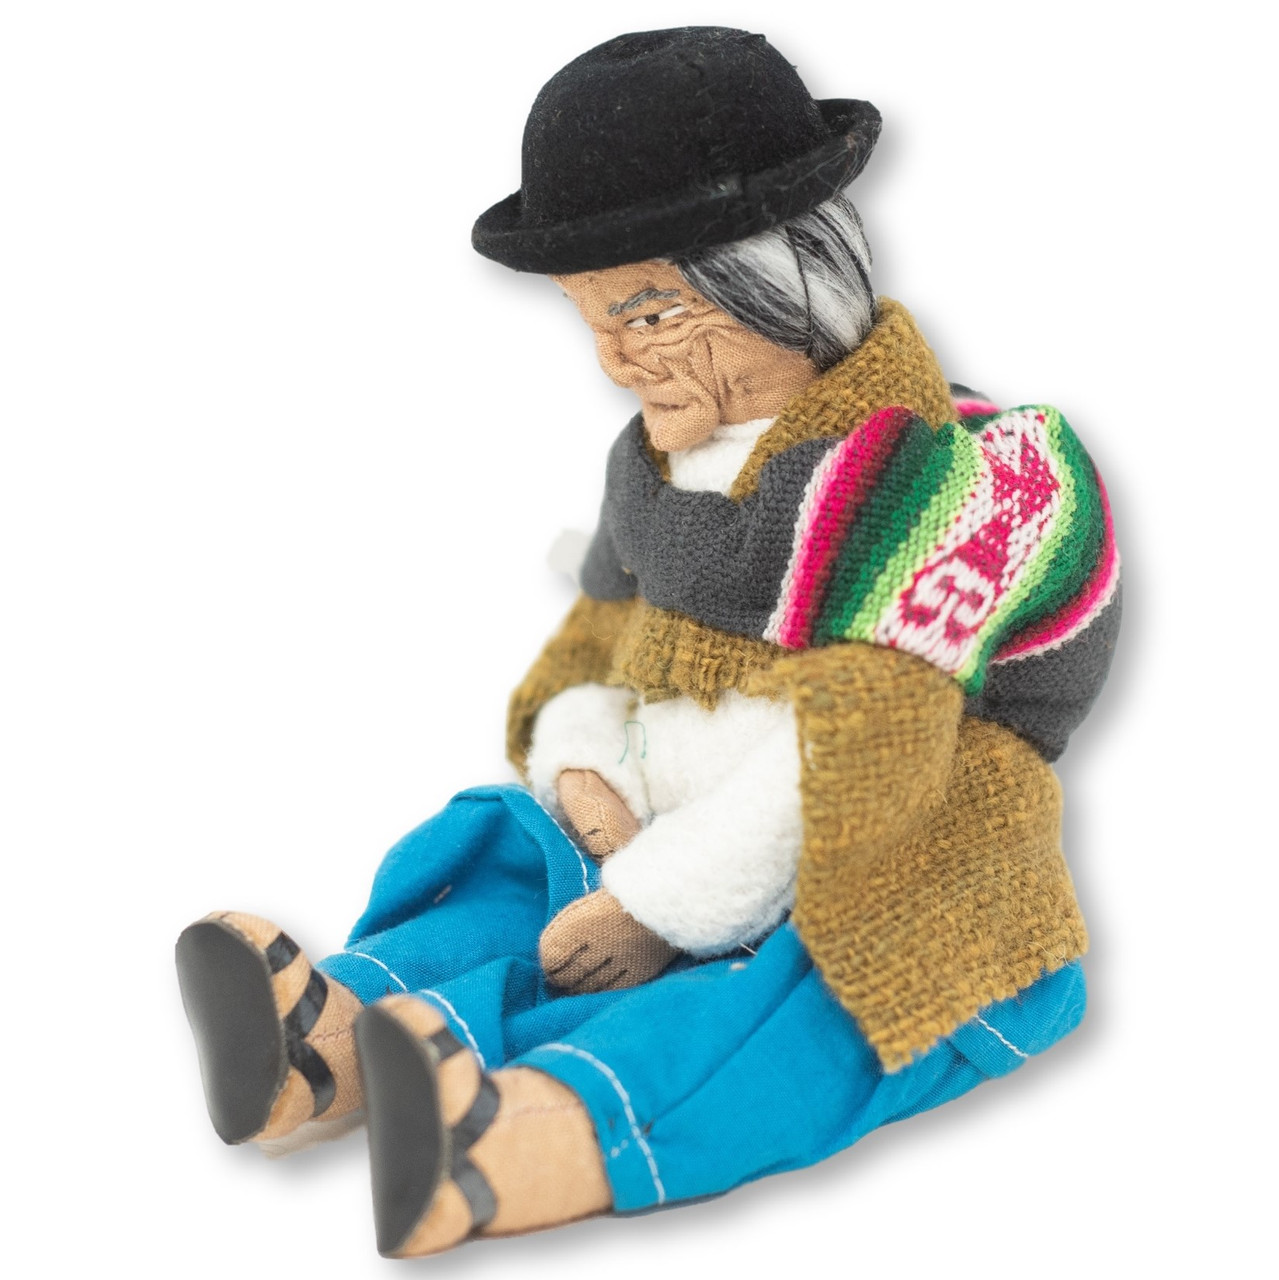 Handmade Dolls bring people of Bolivia to life